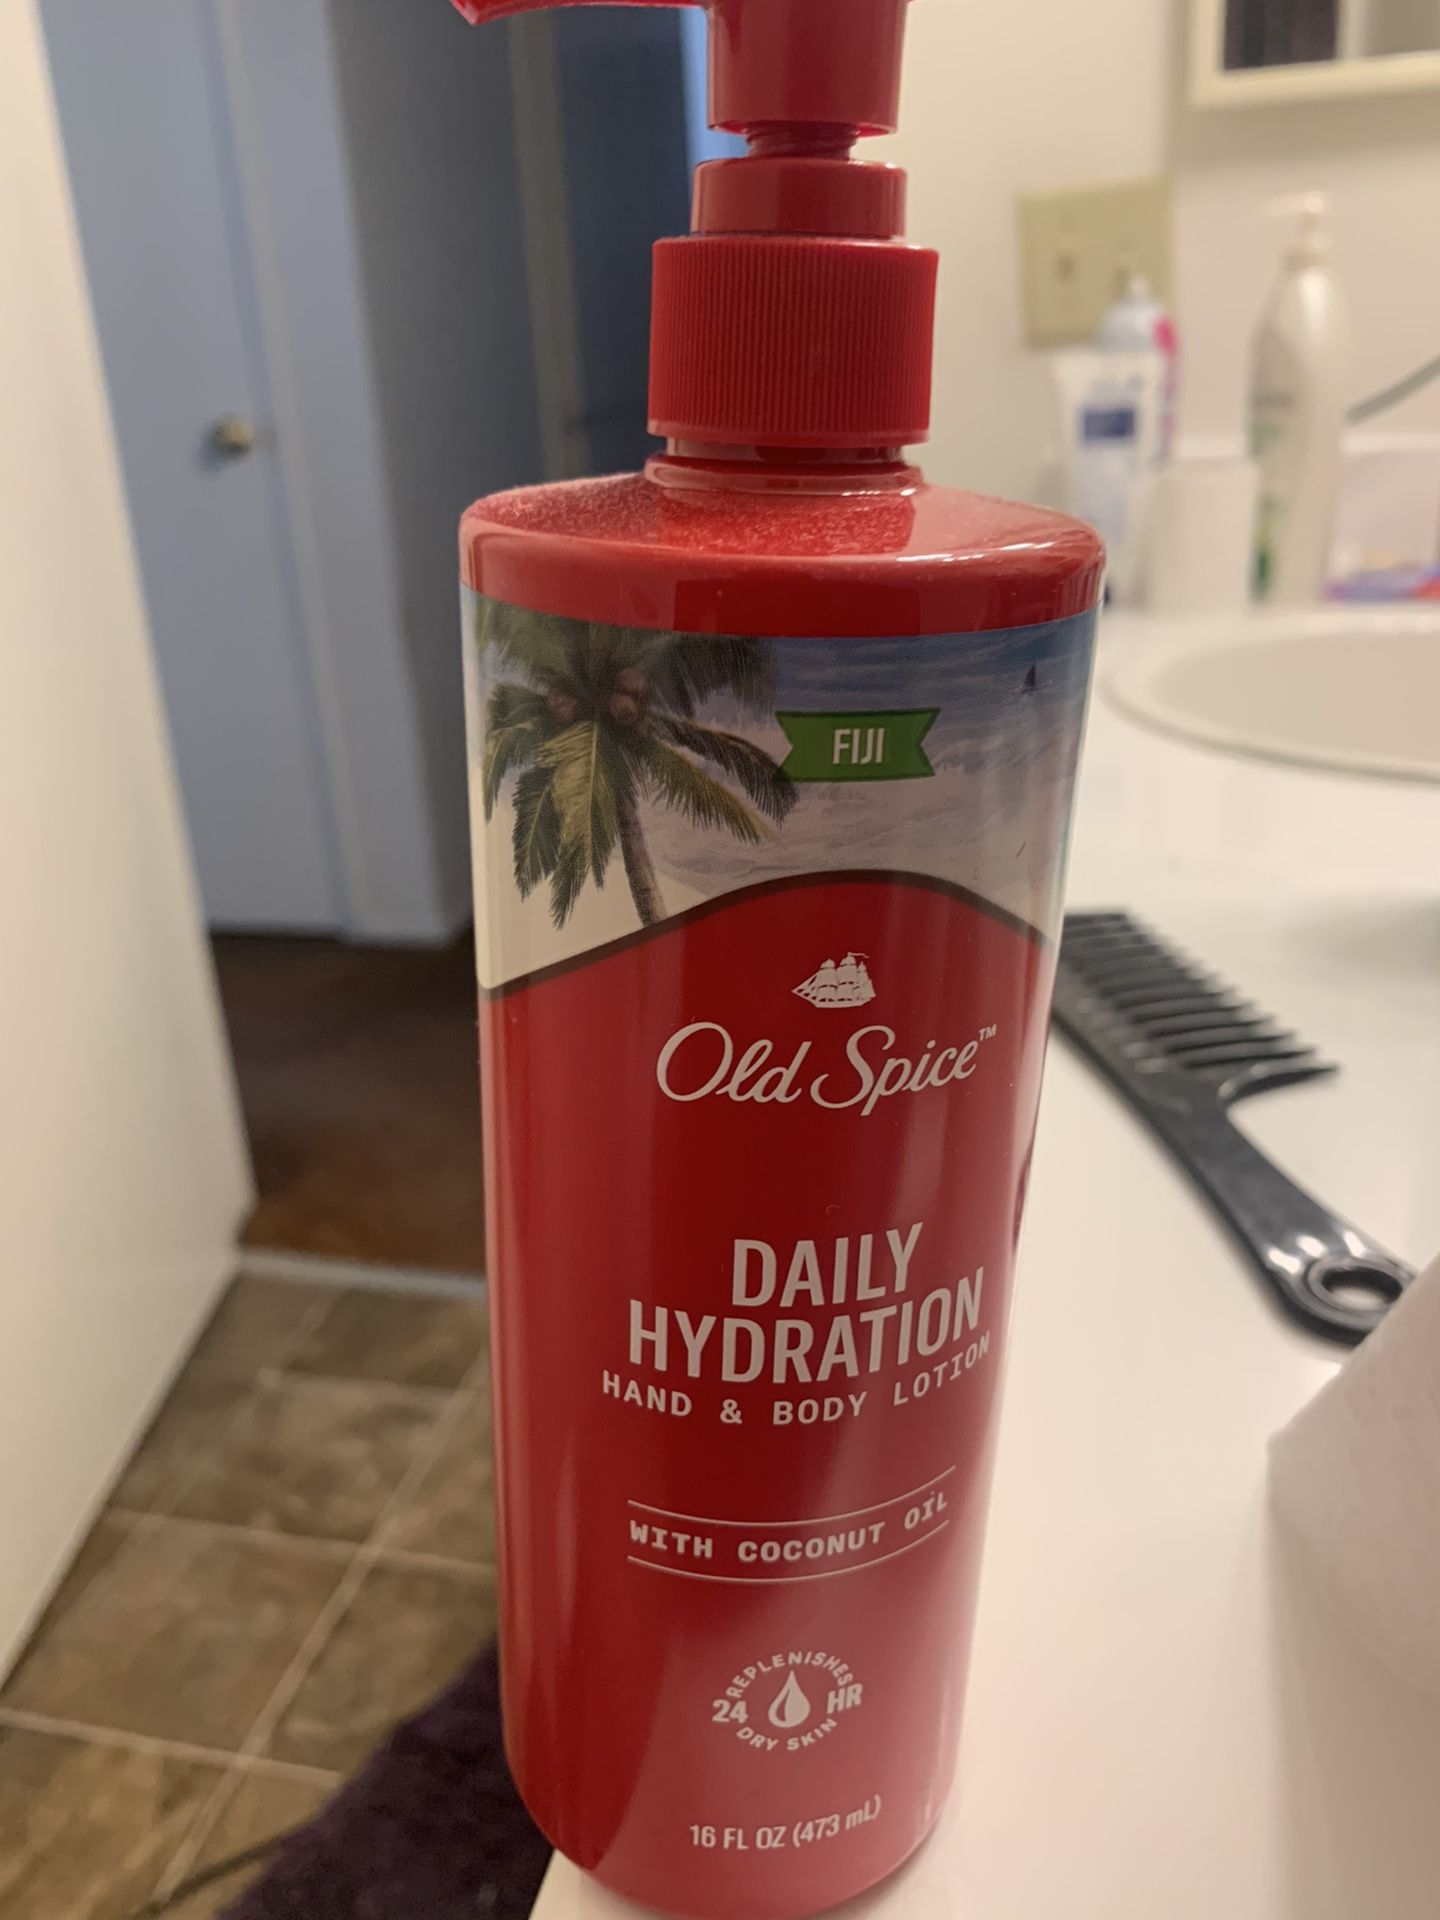 Old Spice Daily Hand And Body Lotion Fiji 16 Fl Oz 474ml